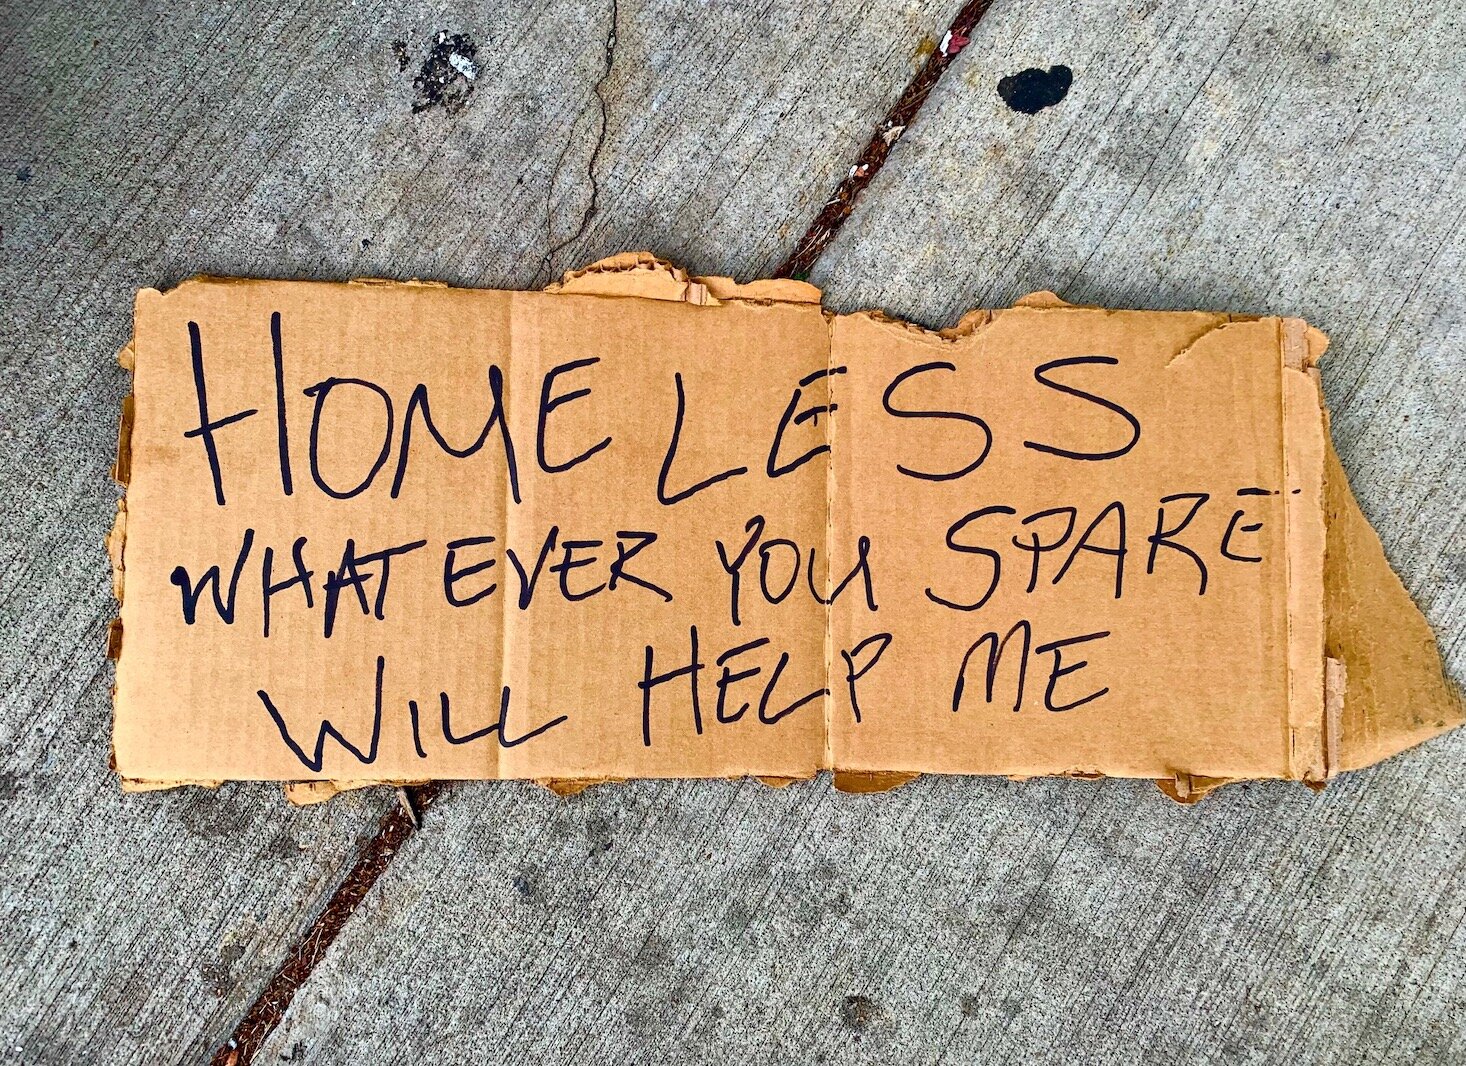 A community advocate for those facing substance abuse says signs that homeless people use to ask for help should be met with compassion.